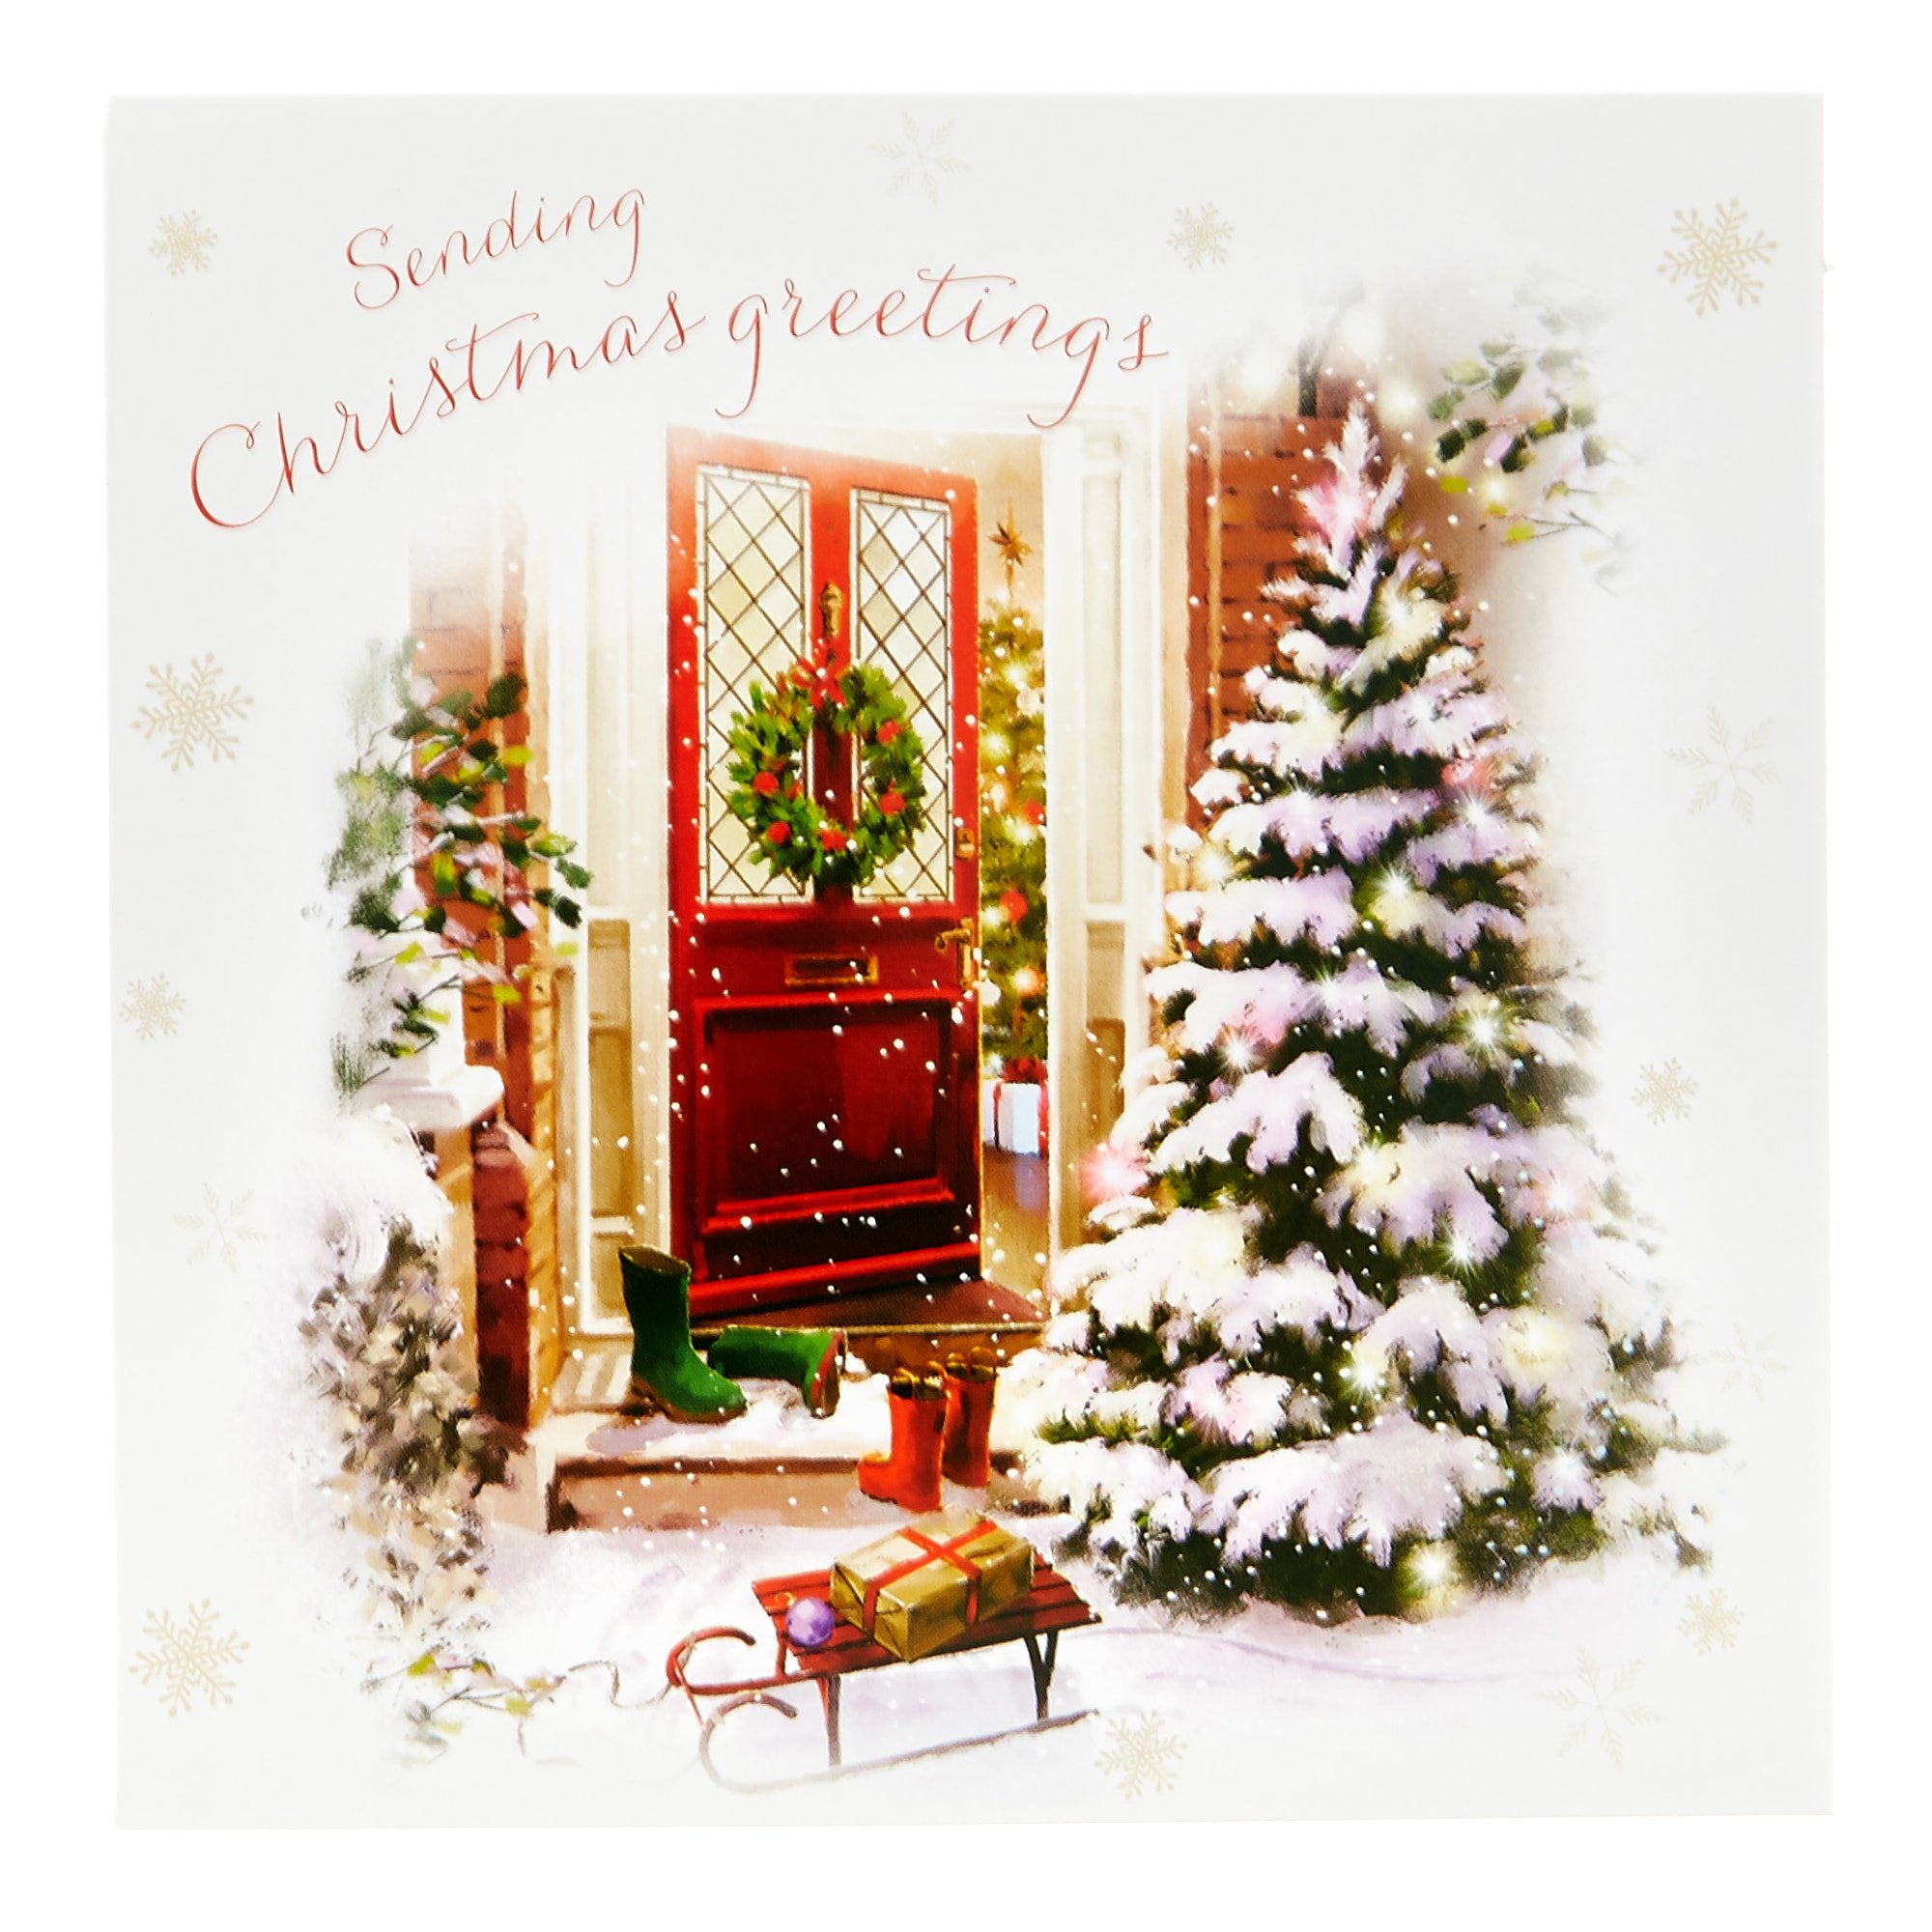 Buy 50 Bumper Value Christmas Cards 10 Designs For Gbp 1 99 Card Factory Uk